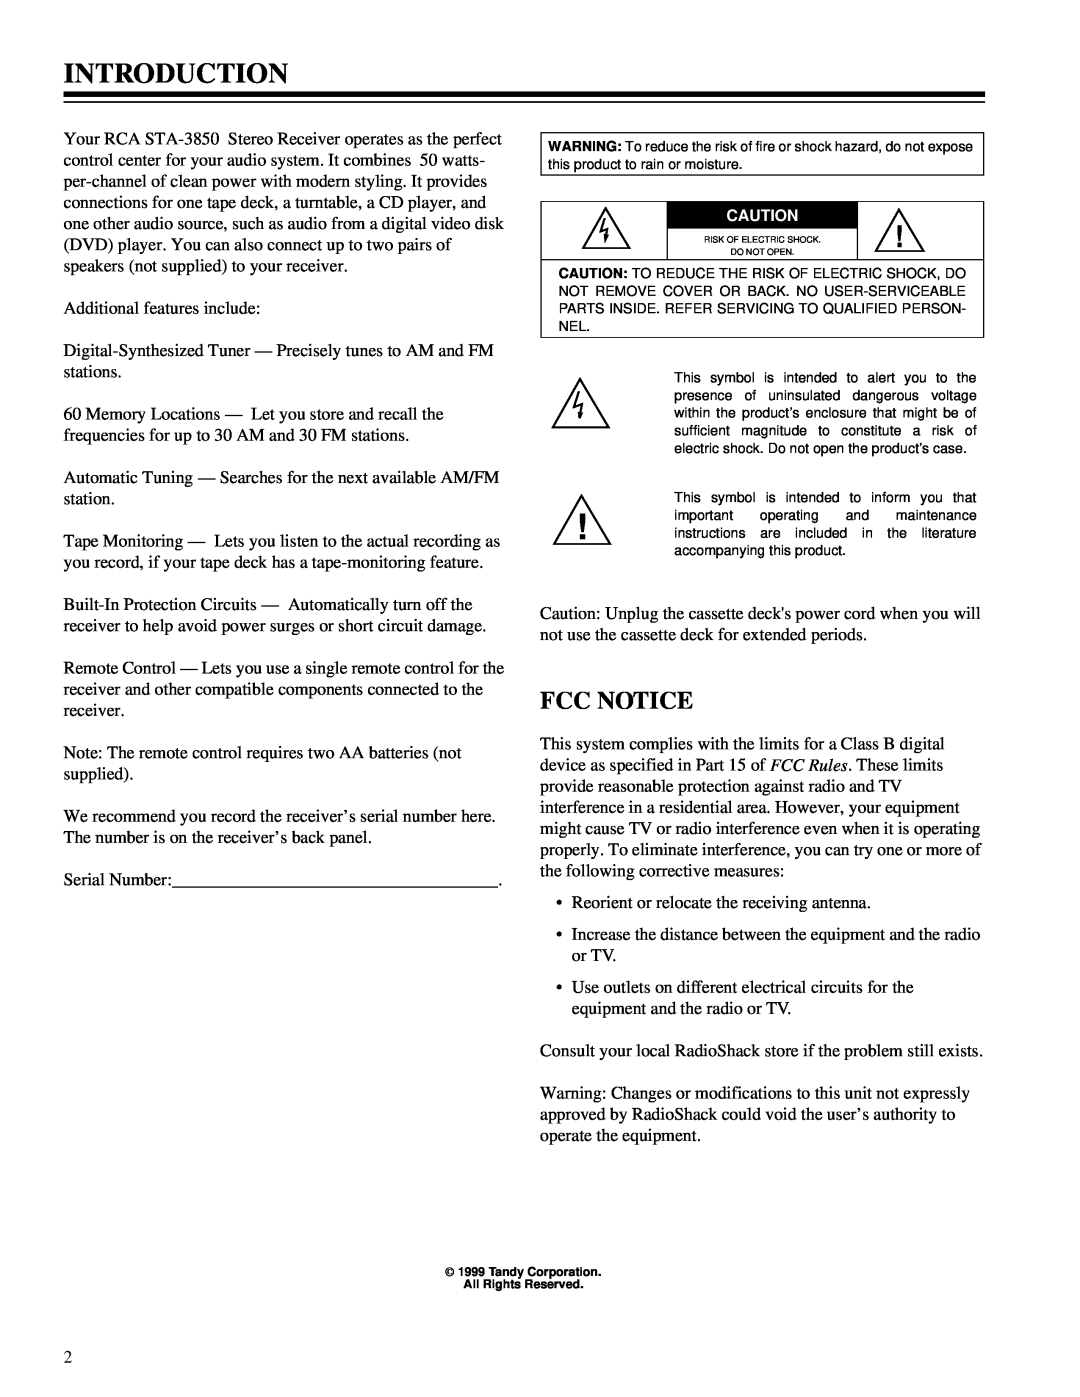 RCA STA-3850 owner manual Introduction, Fcc Notice 